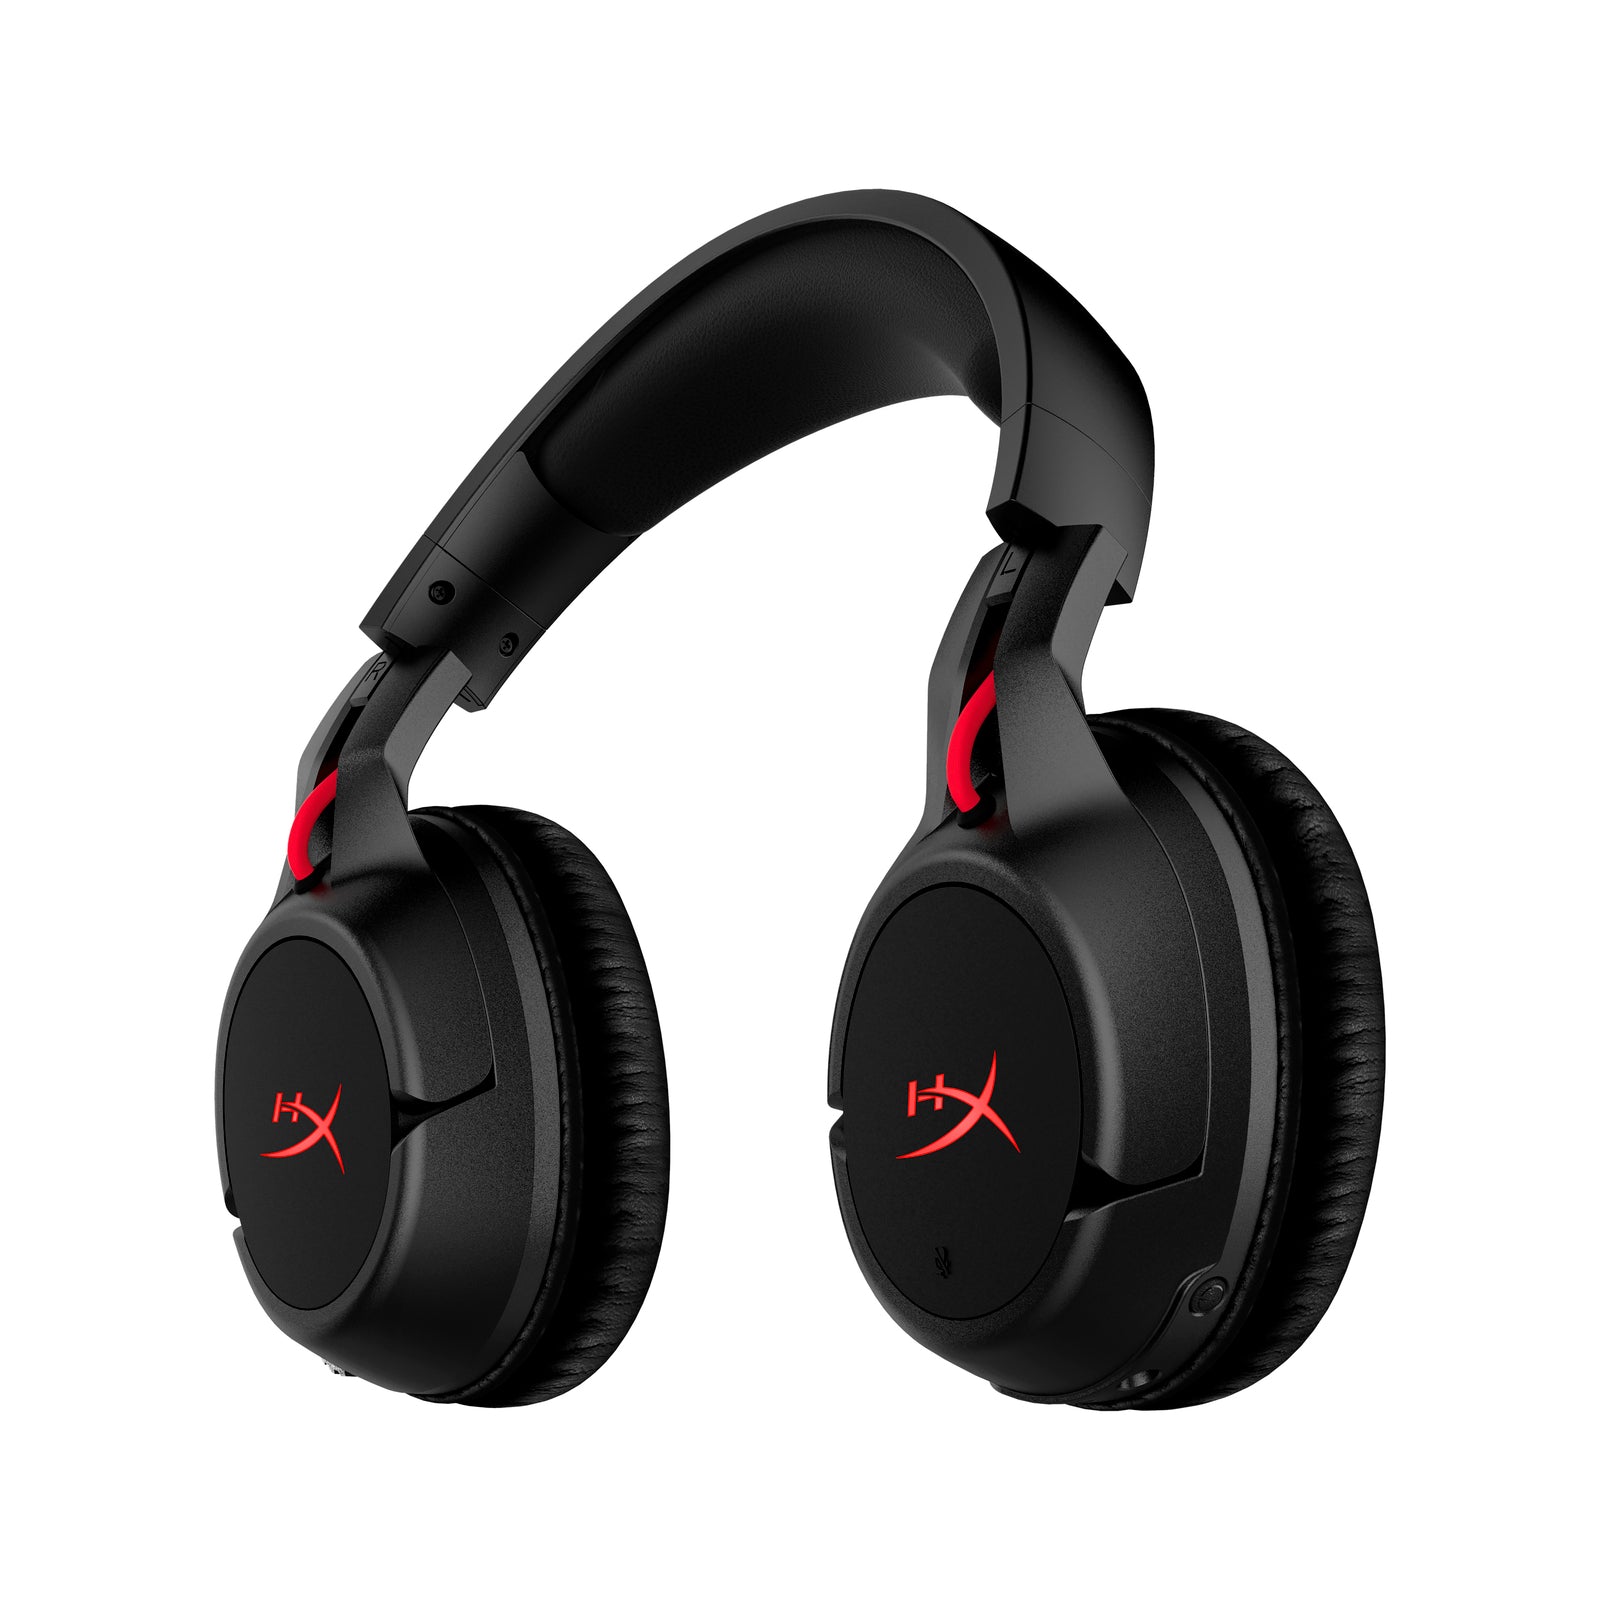 Cloud Flight – Wireless USB Headset for PC and PS4™ | HyperX